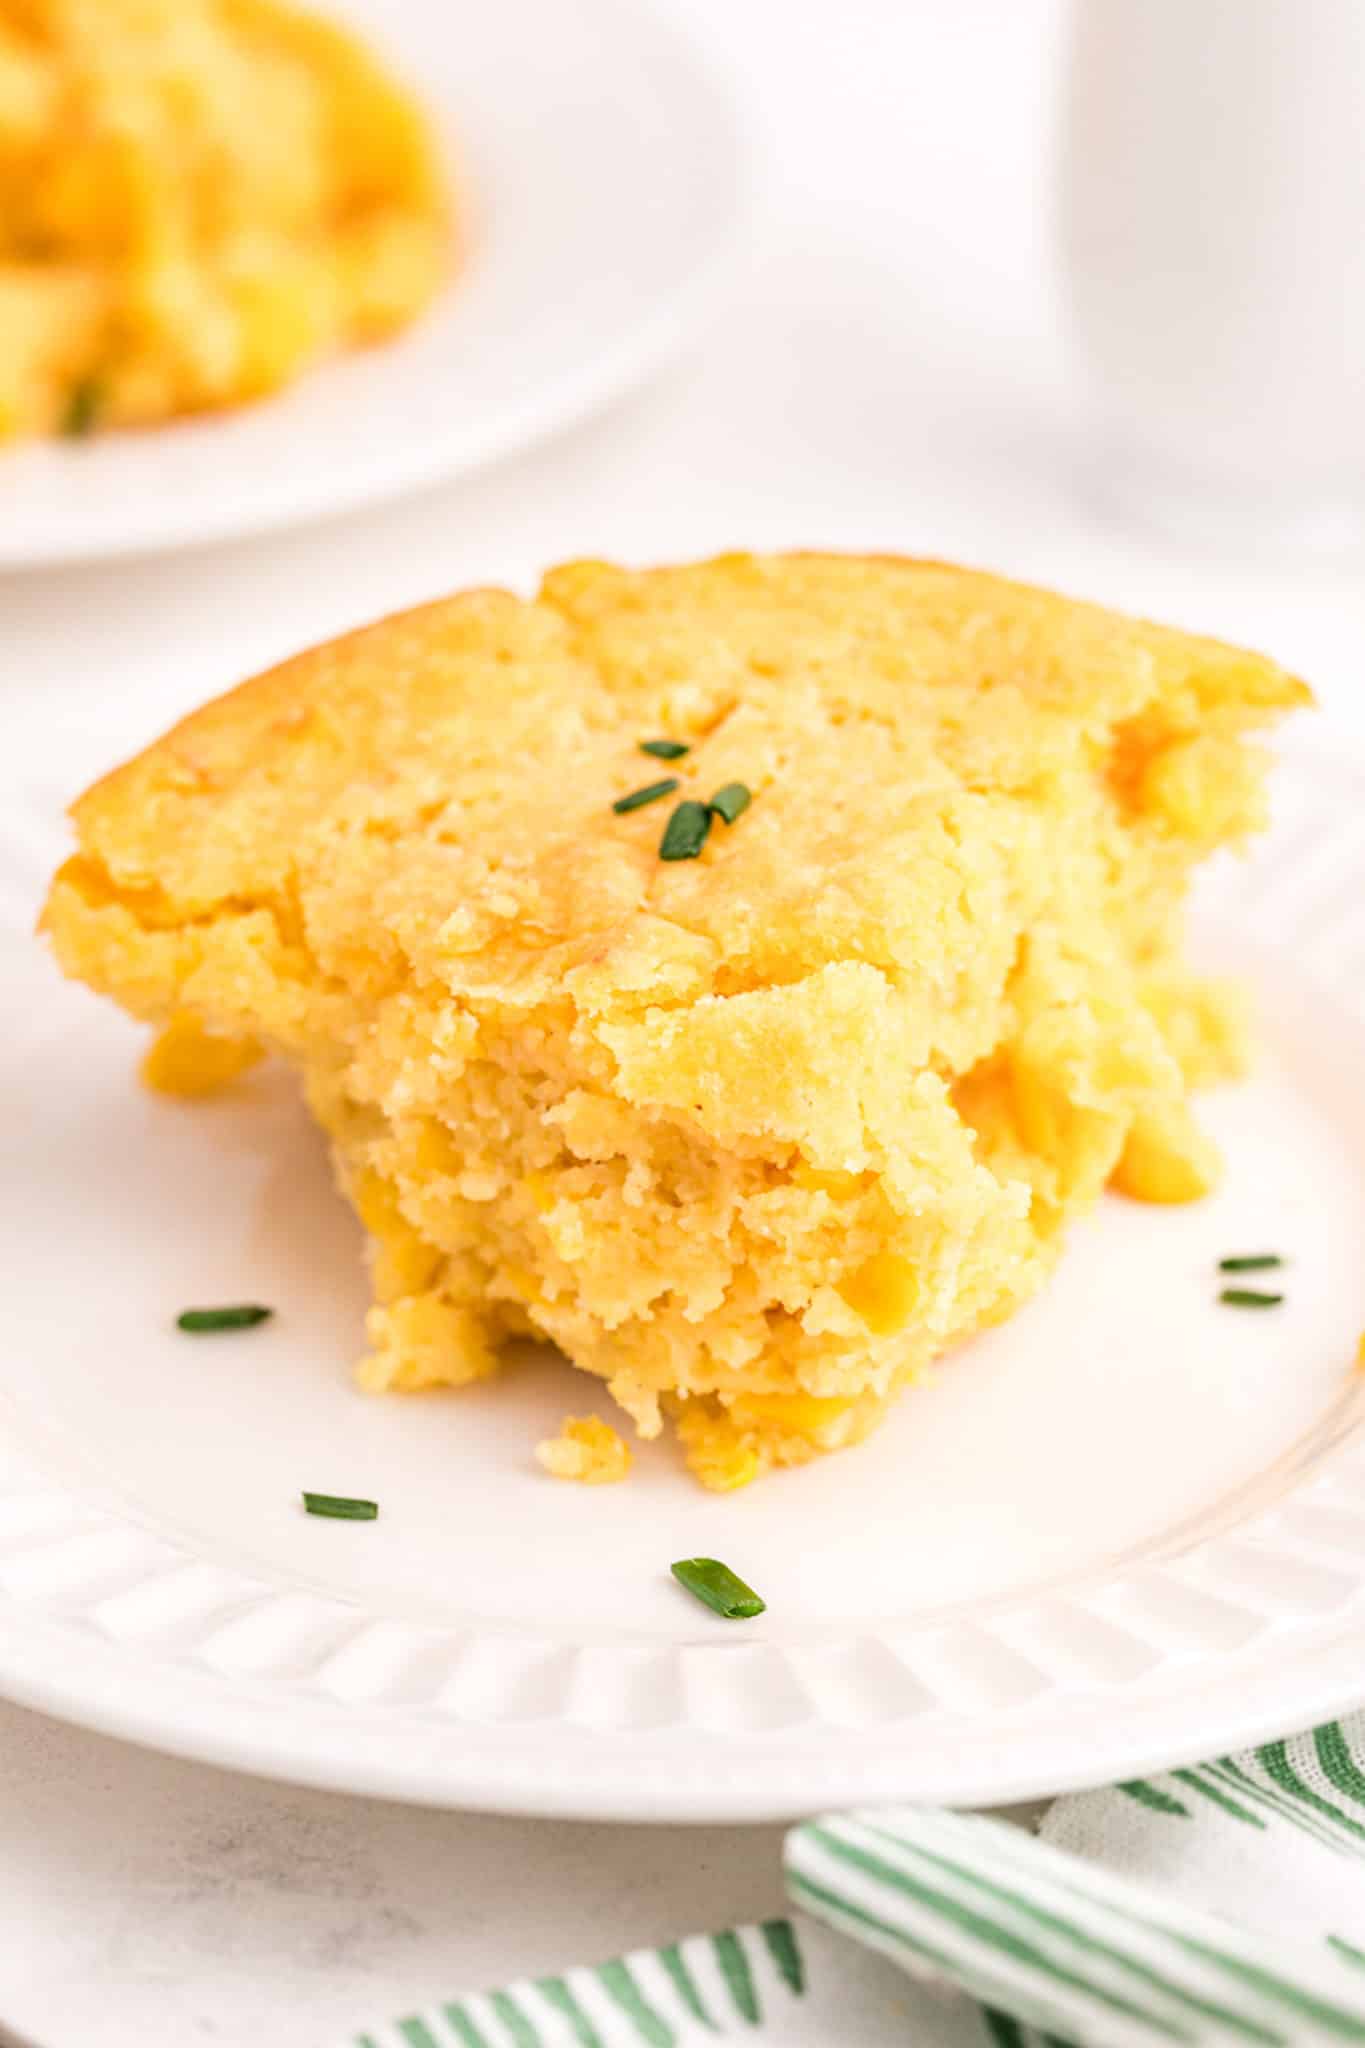 a slice of corn casserole on plate made without milk or butter.